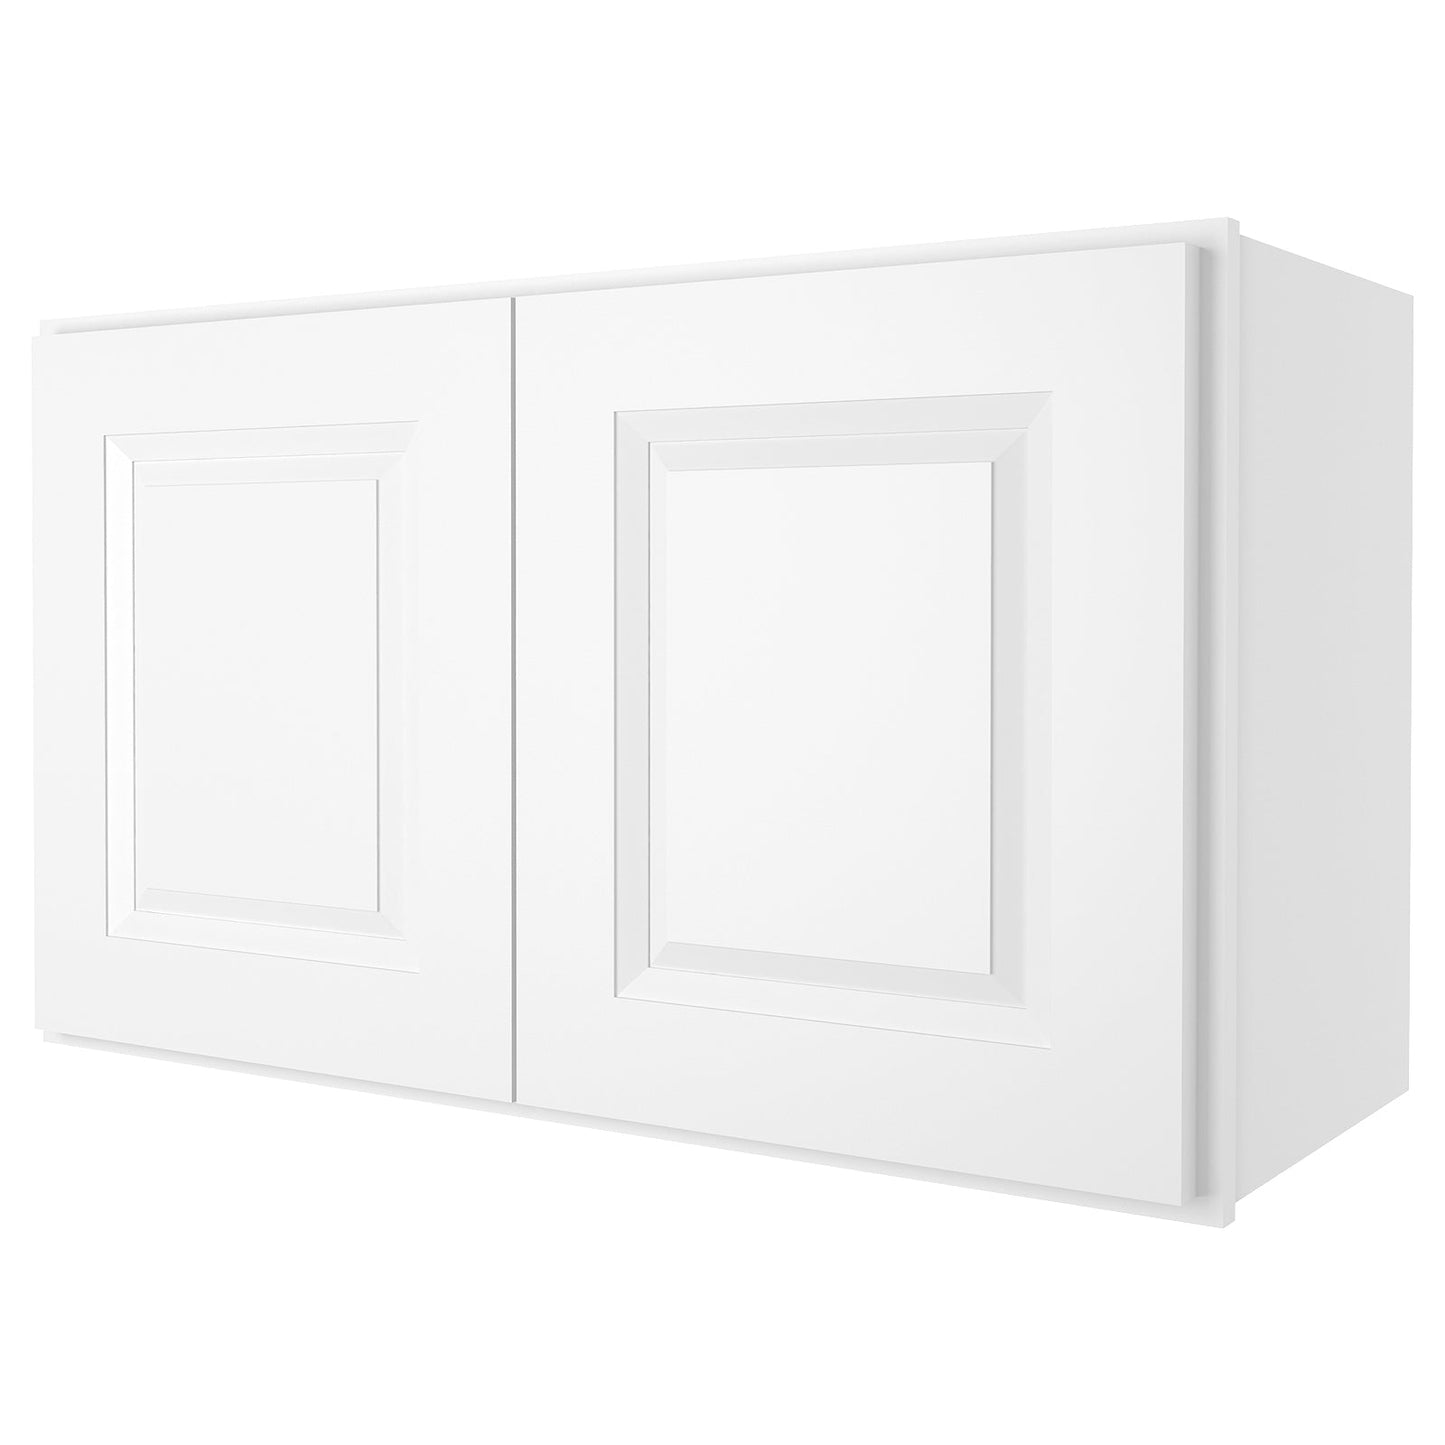 Medicine Cabinet Wall Mounted W3018